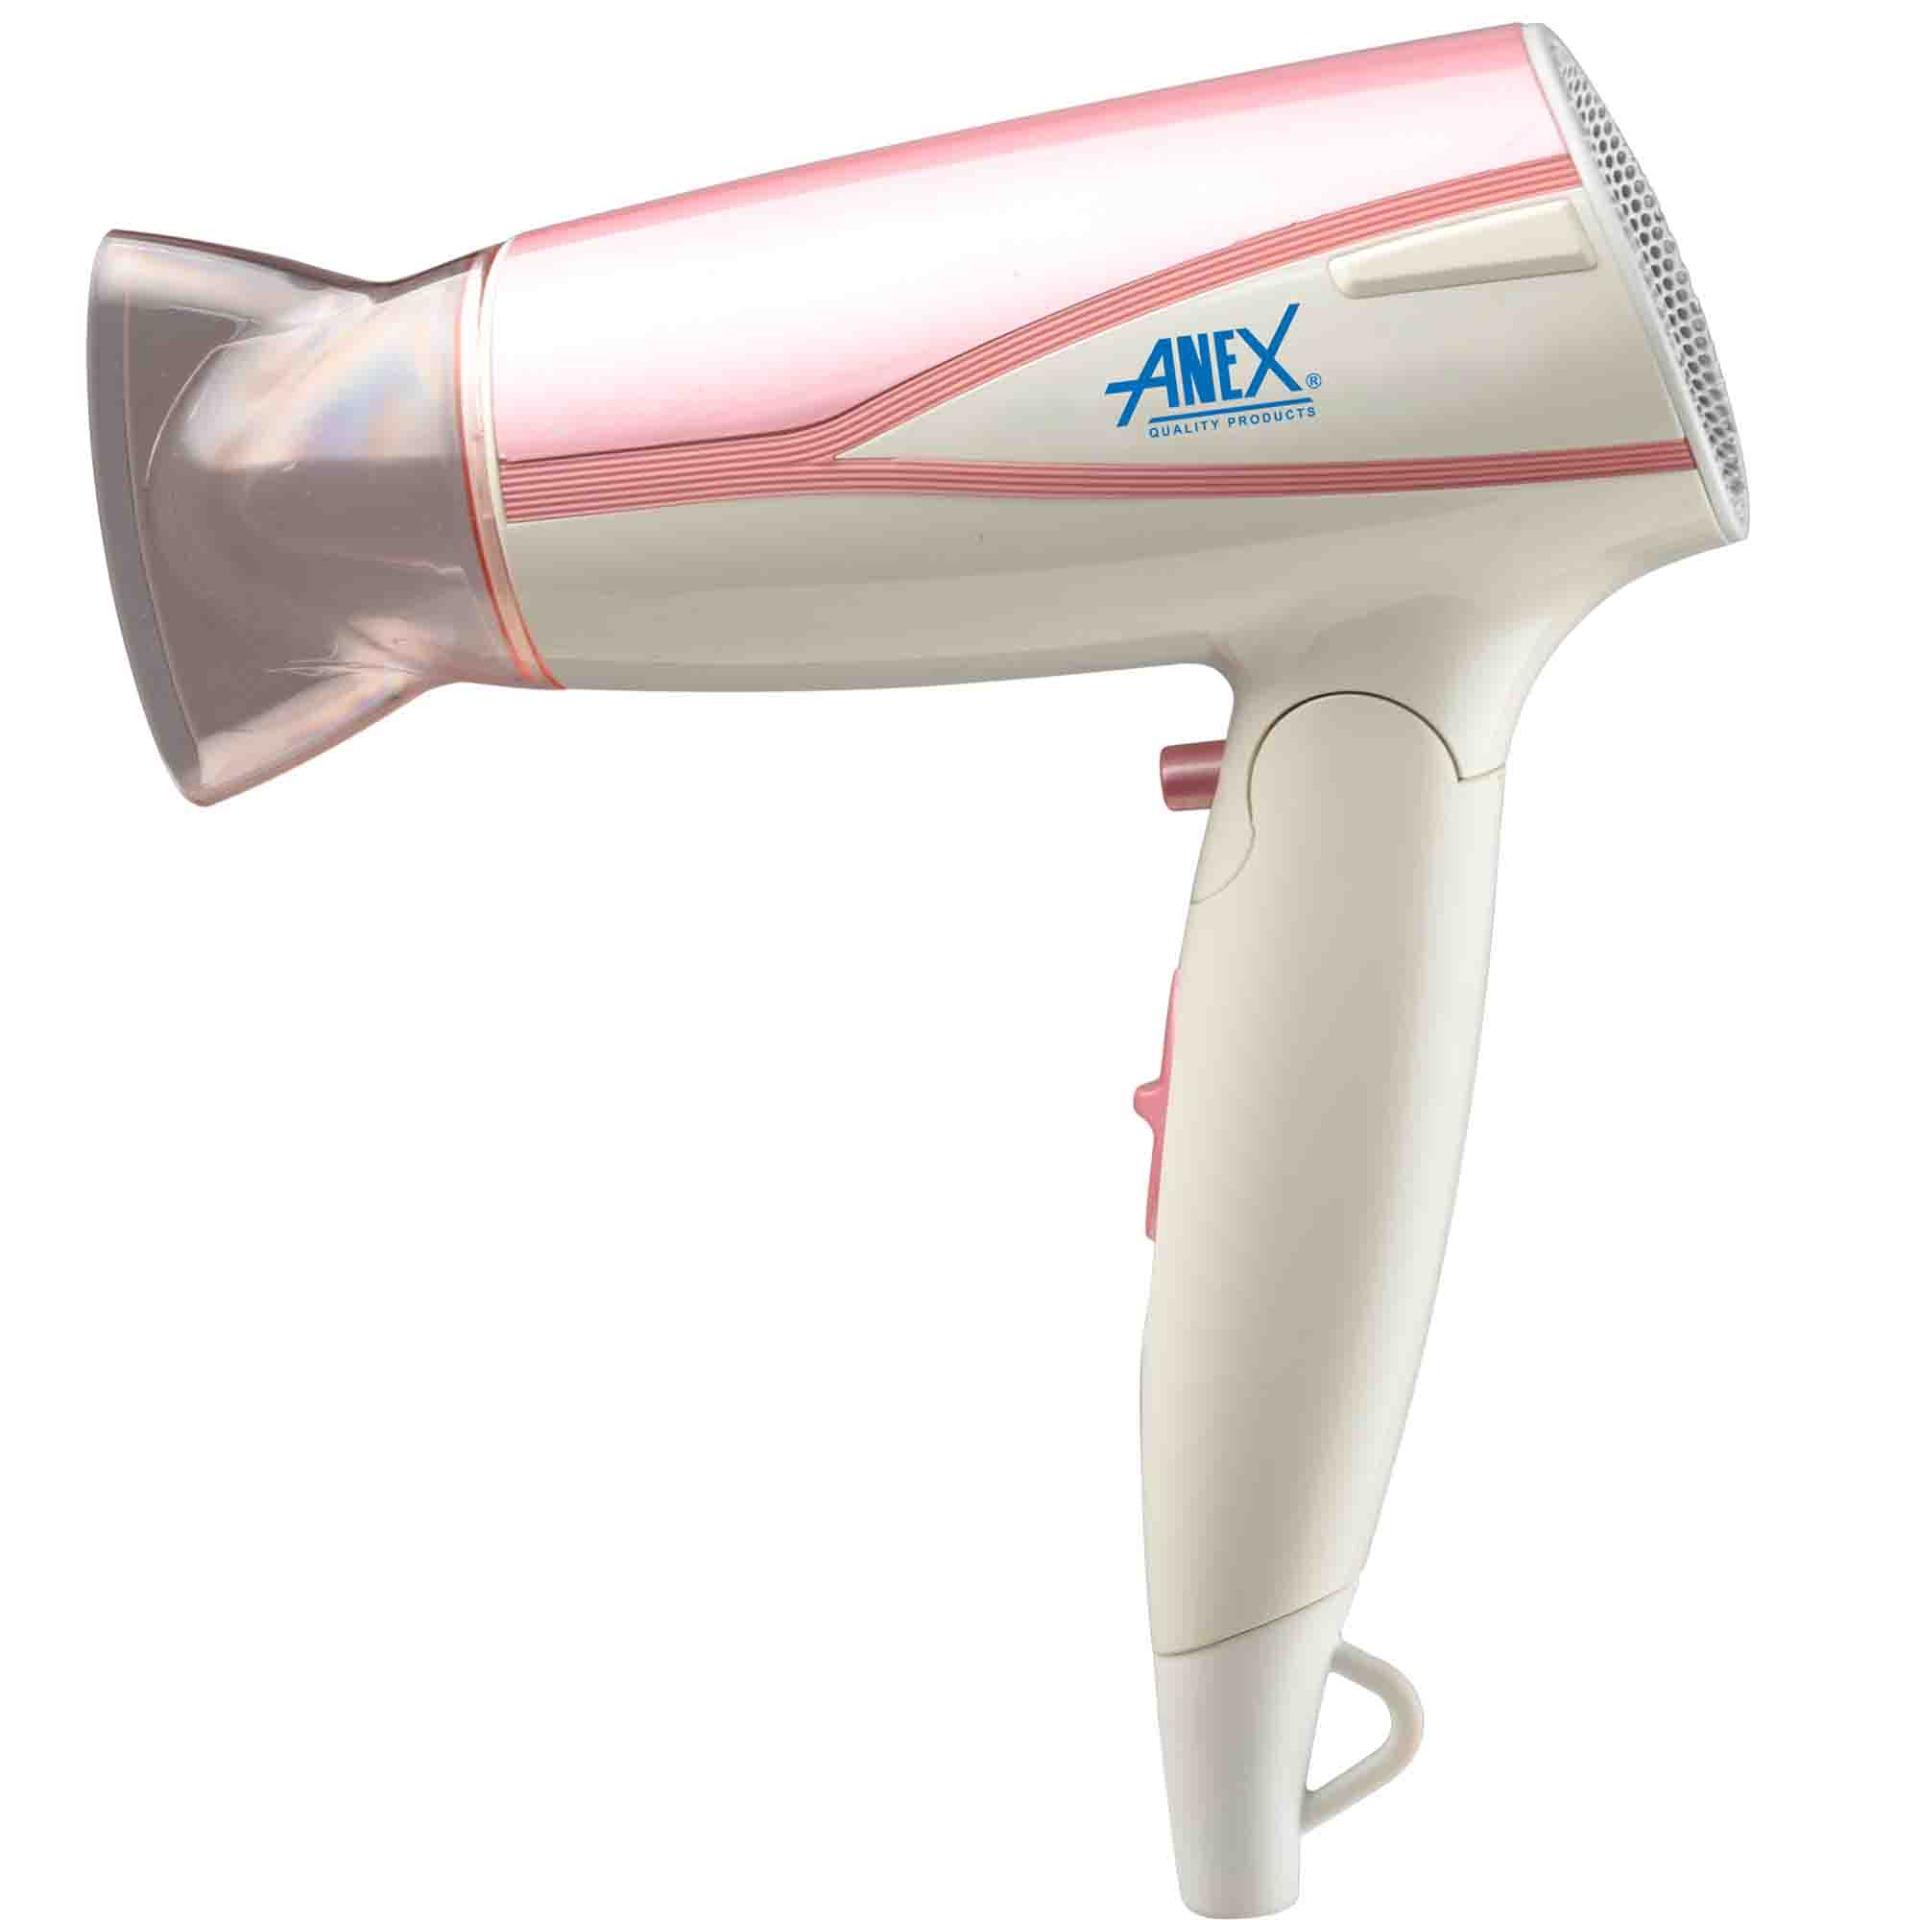 AG7002 - Deluxe Hair Dryer 1600W - Pink